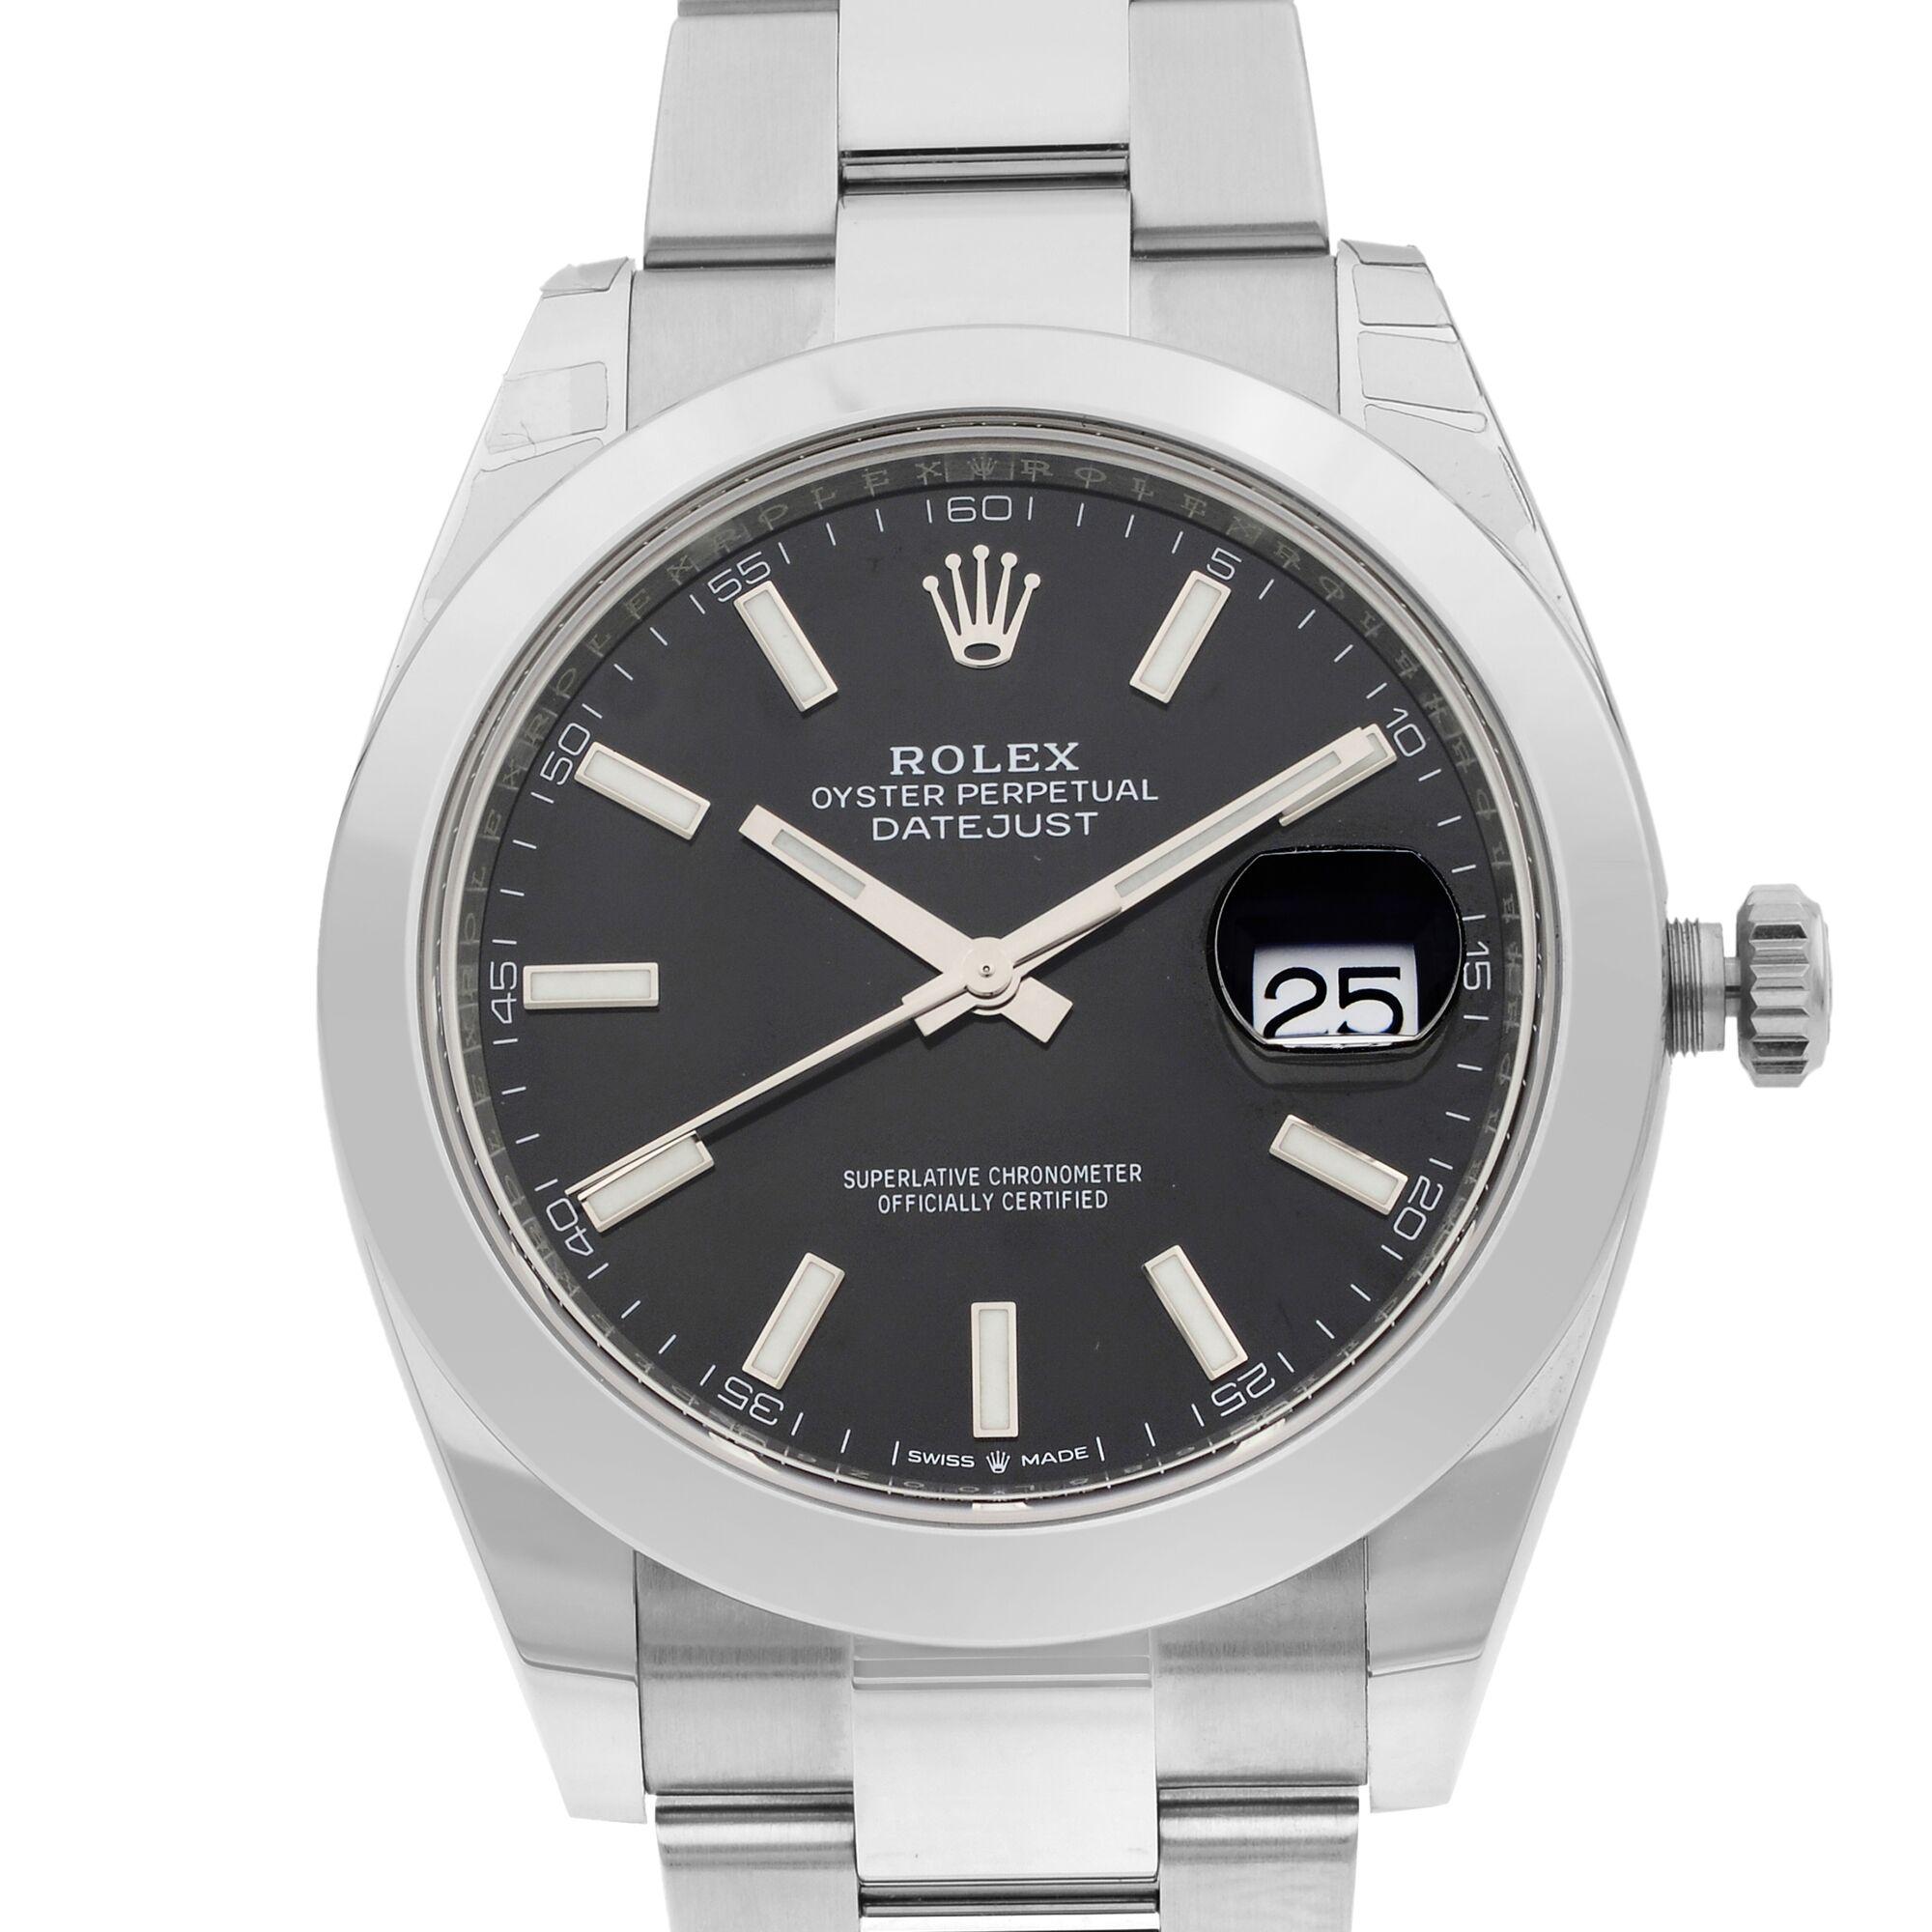 This brand new Rolex Datejust 41 126300  is a beautiful men's timepiece that is powered by mechanical (automatic) movement which is cased in a stainless steel case. It has a round shape face, date indicator dial and has hand sticks style markers. It